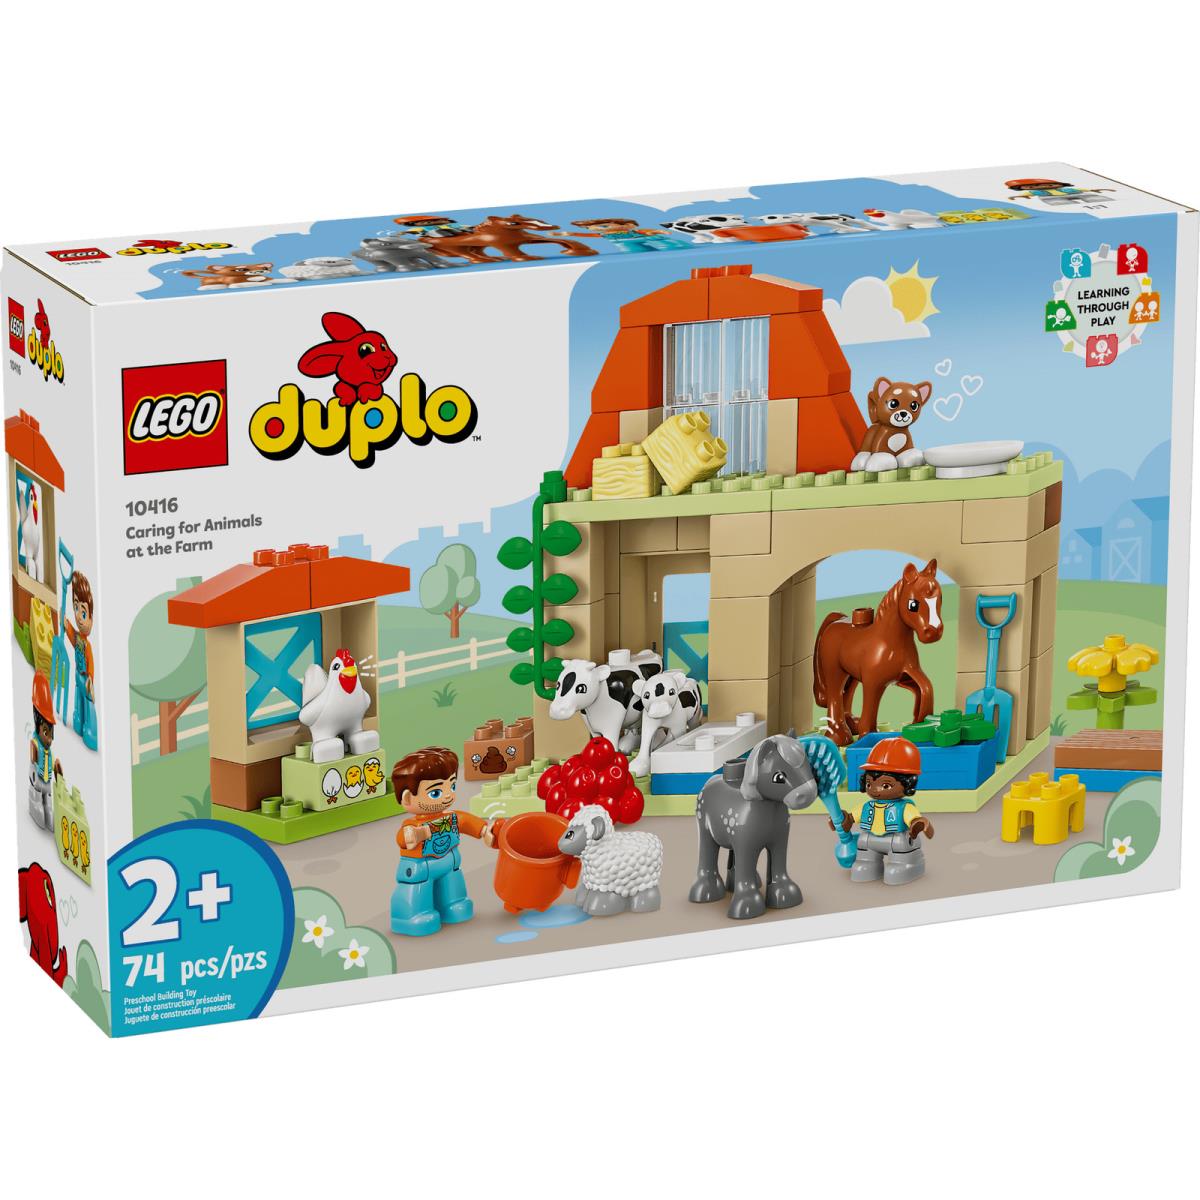 Lego Duplo Town Caring For Animals at The Farm 10416 Building Toy Set Gift